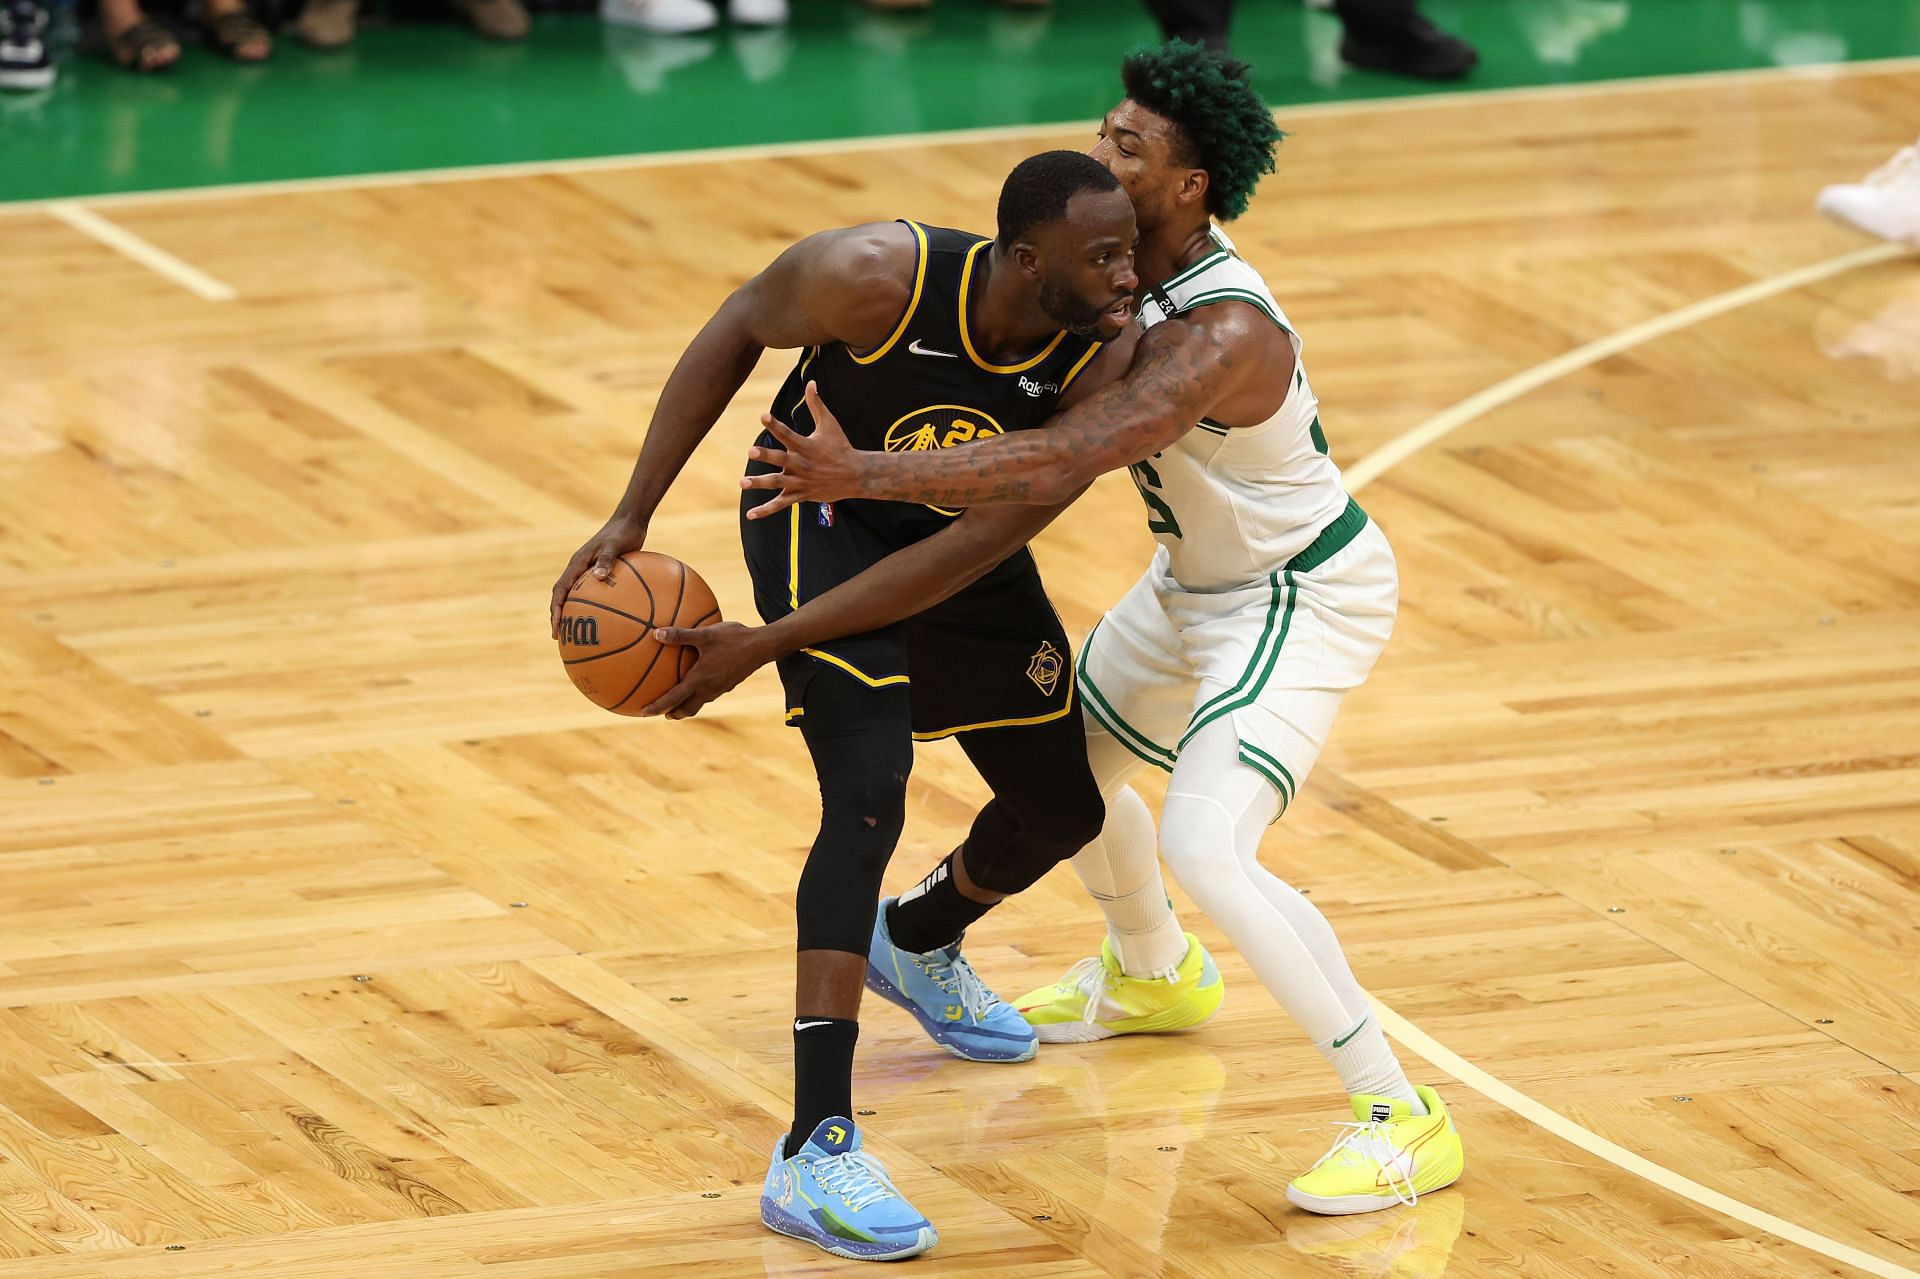 Draymond Green (left) defended by Marcus Smart in Game Three of the NBA Finals